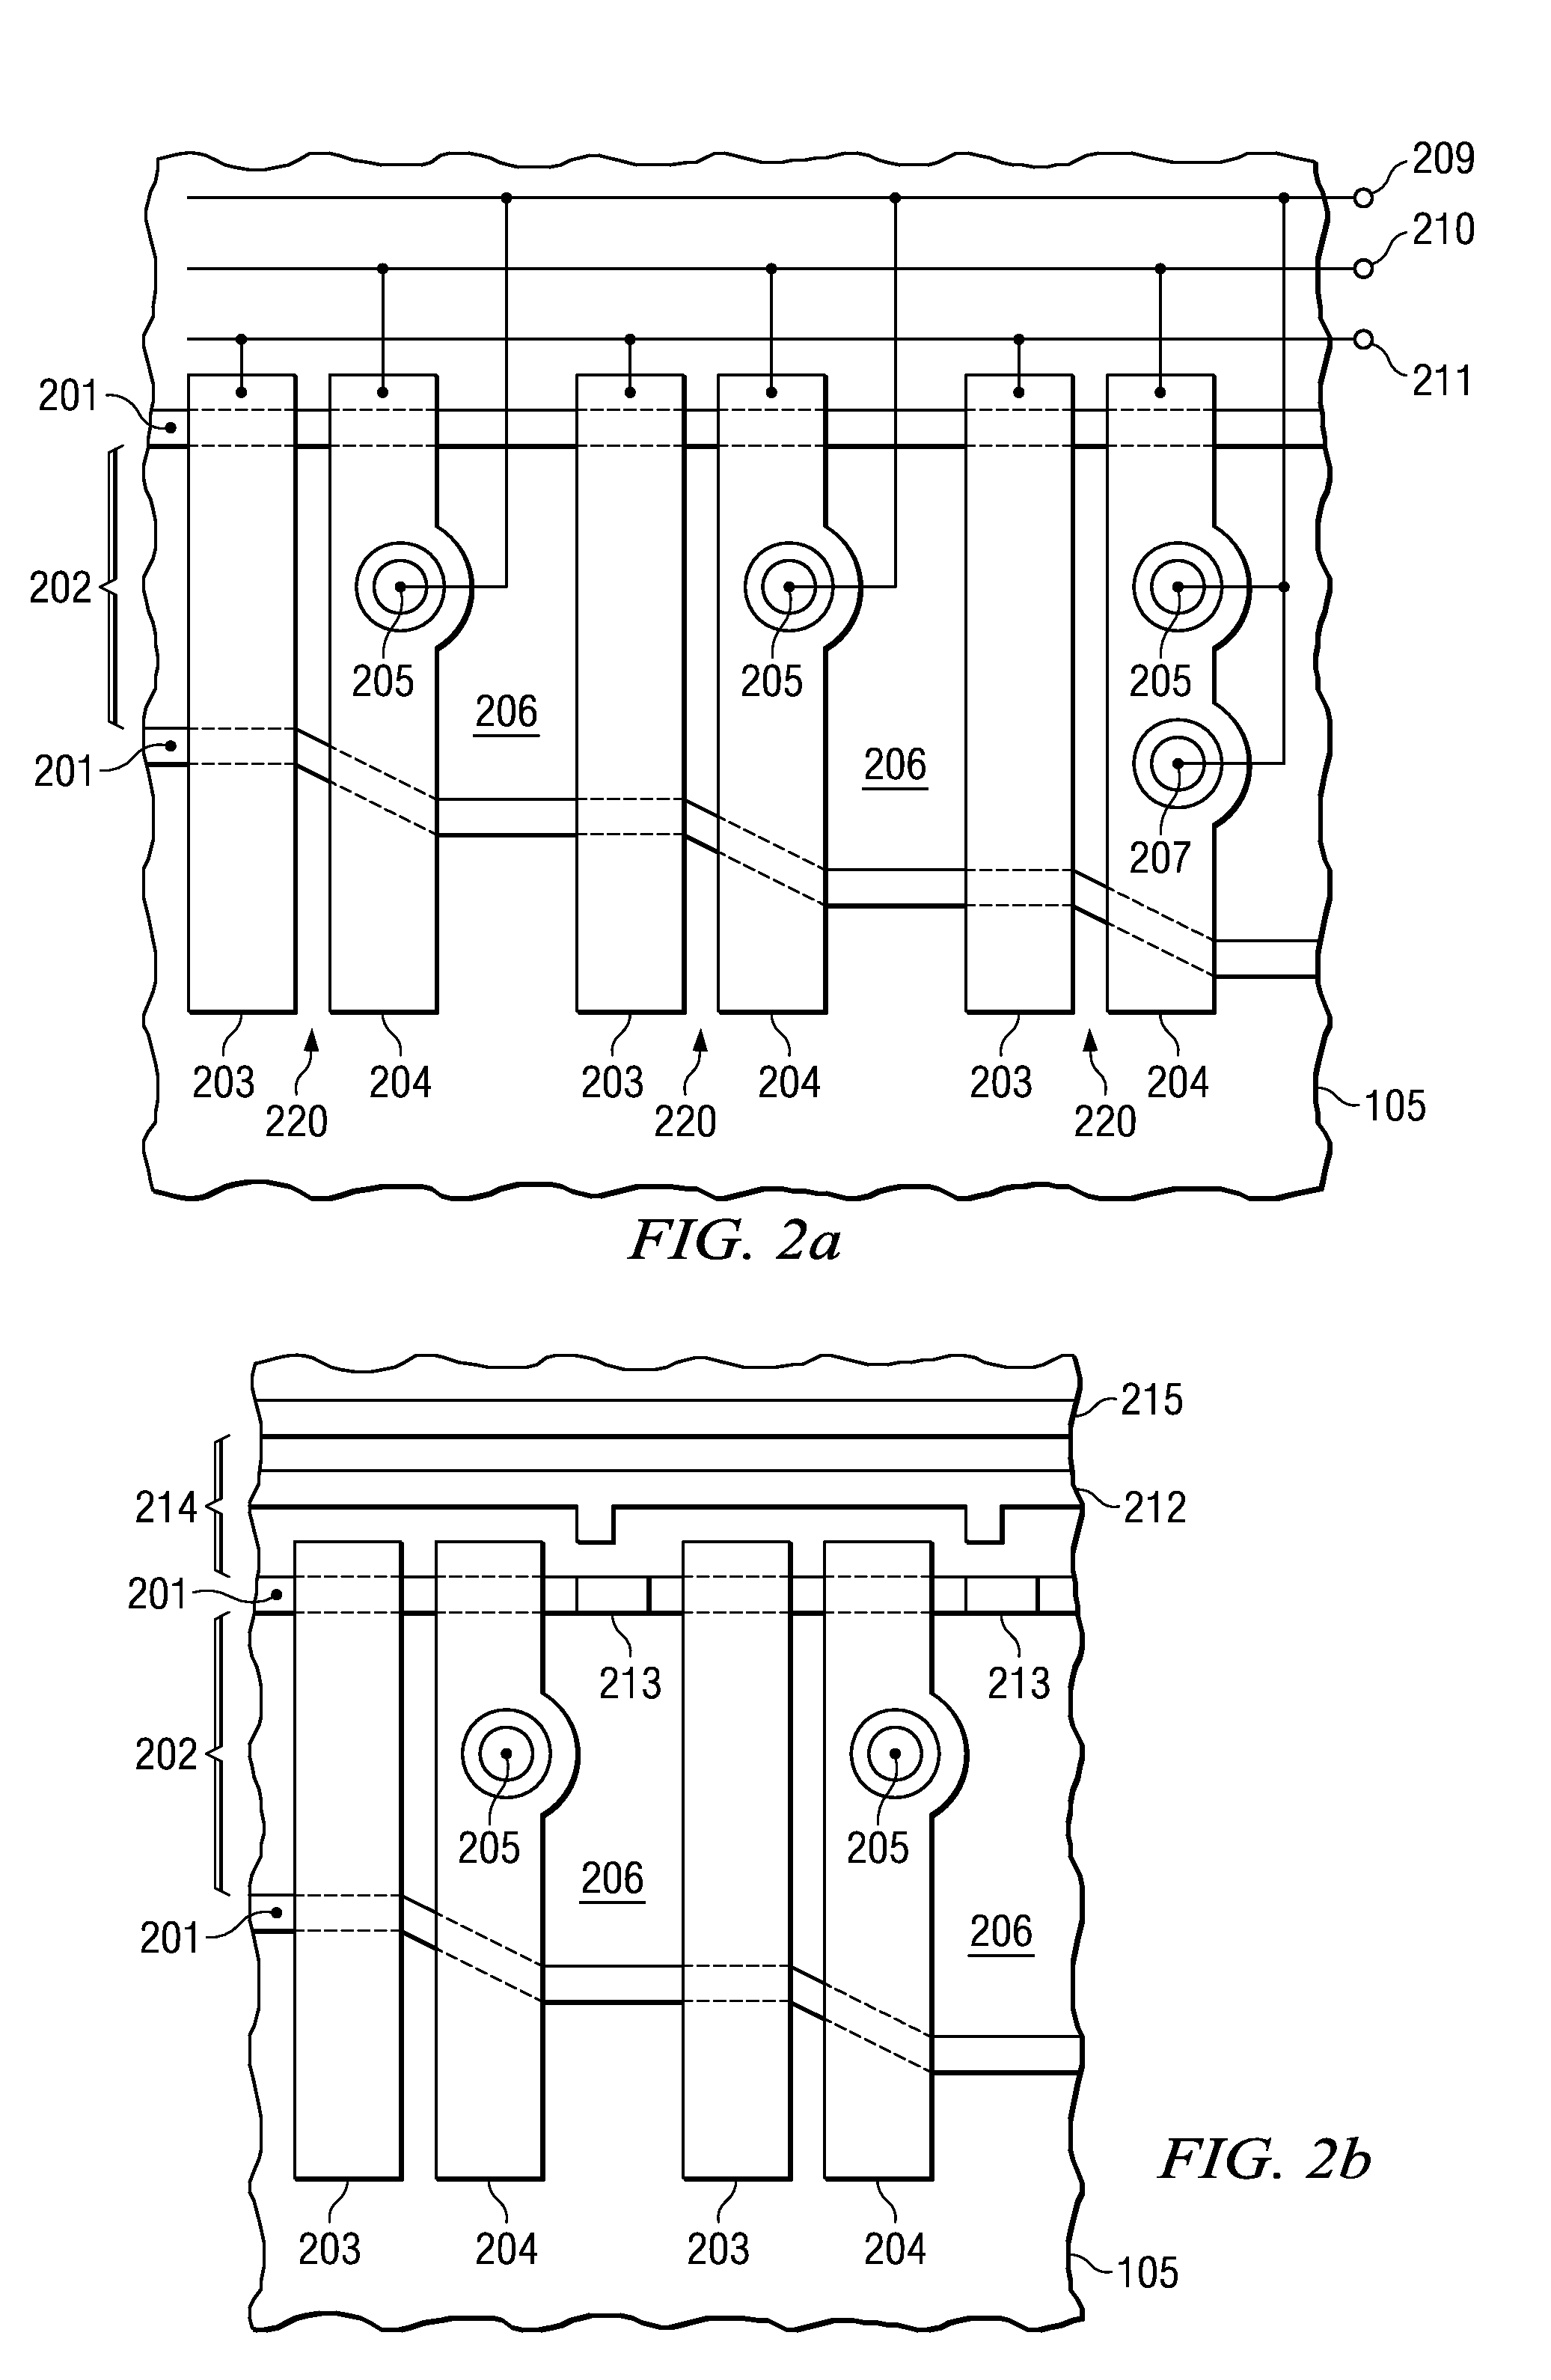 High dynamic range charge readout system